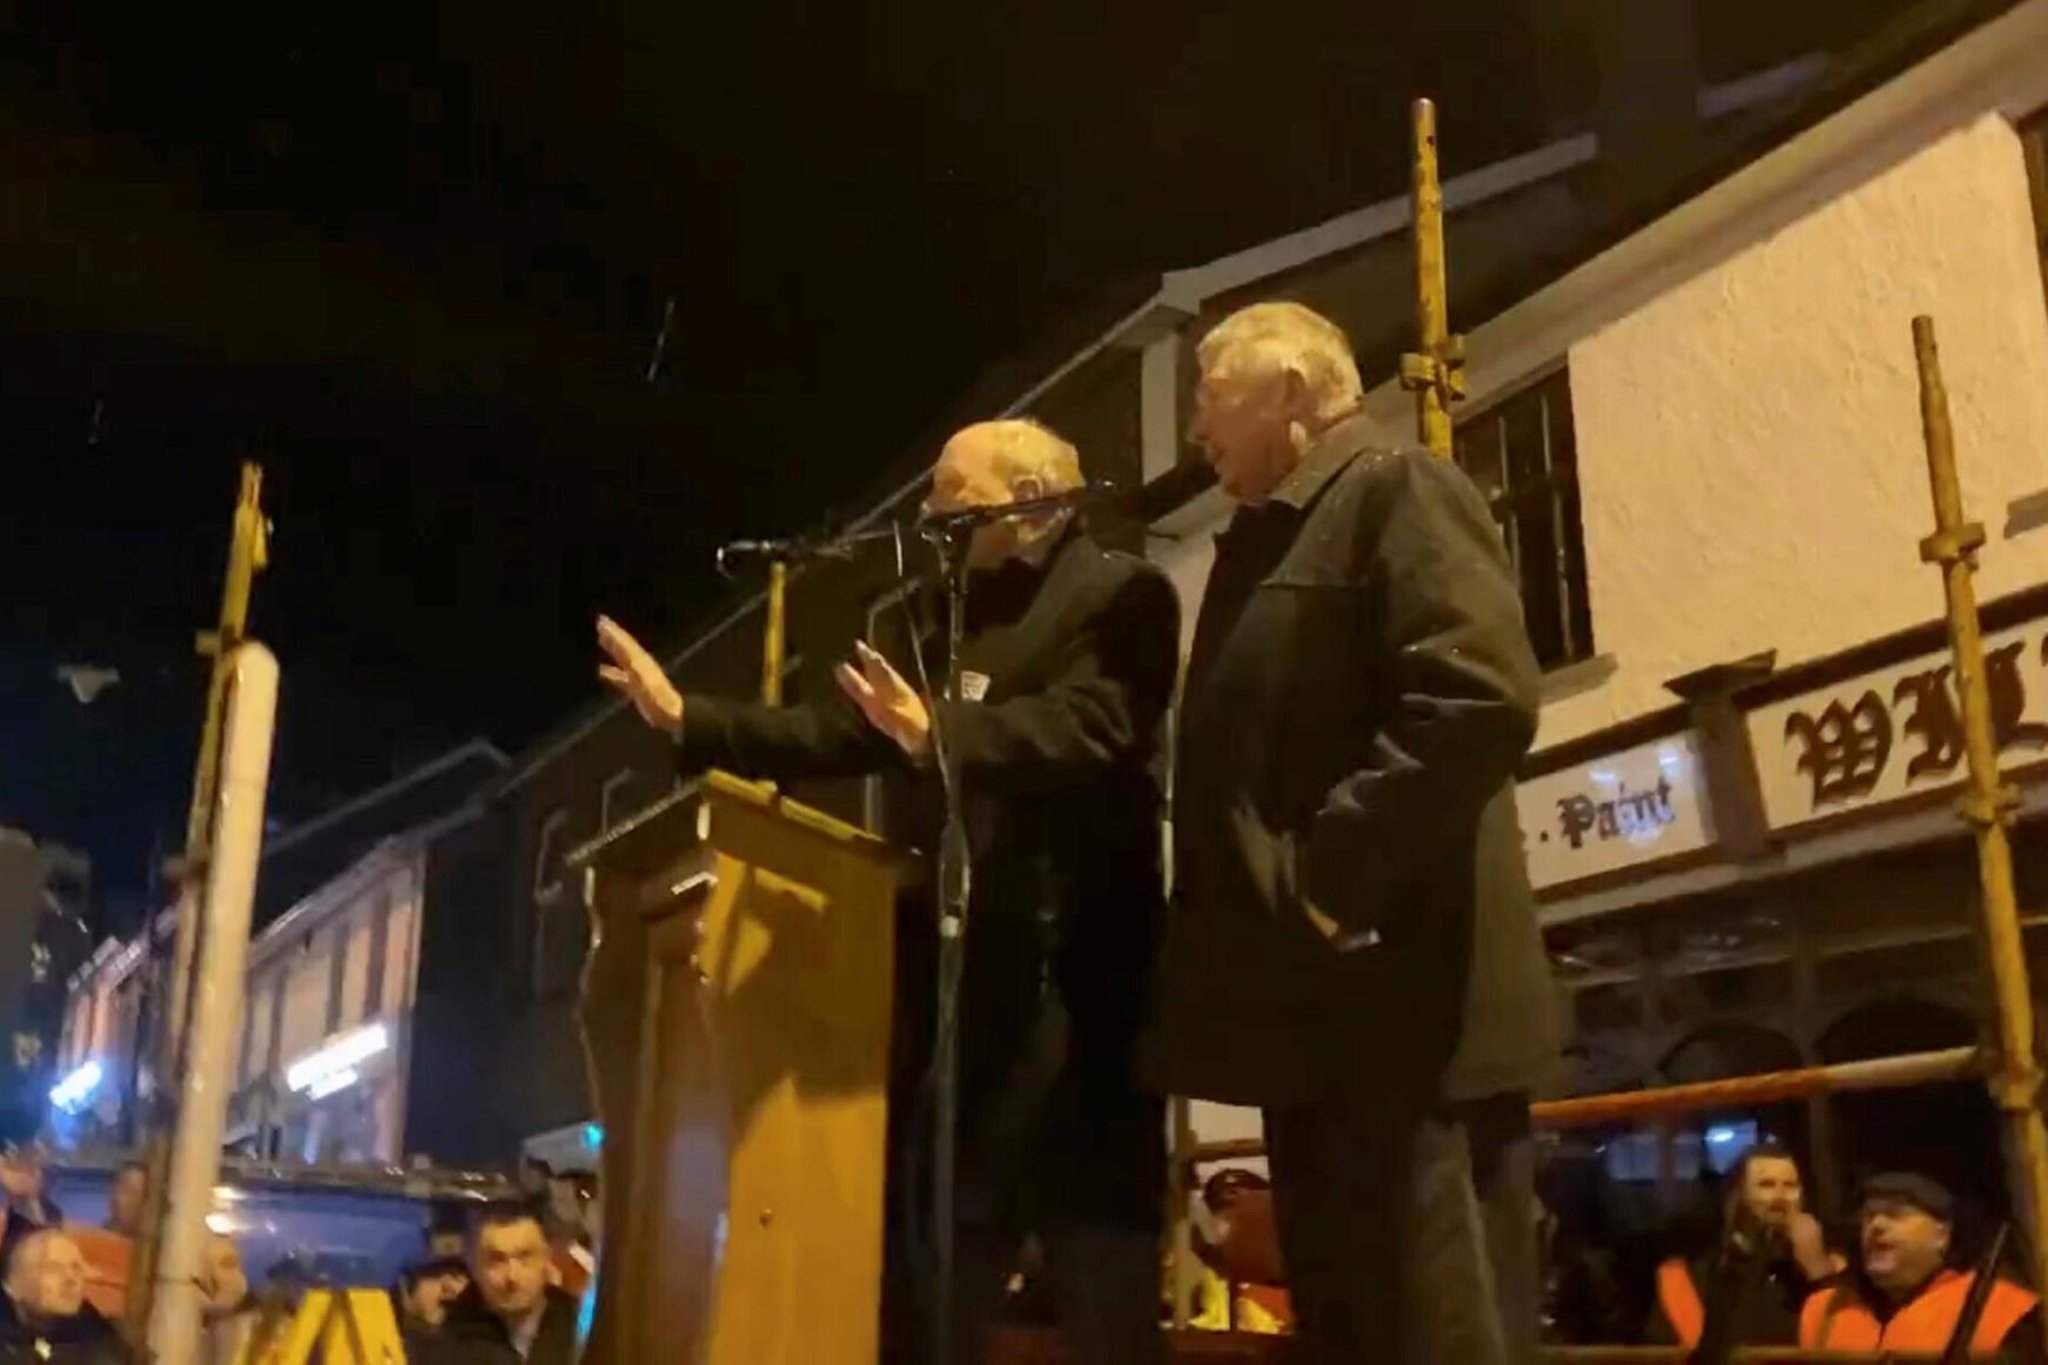 DUP MP Sammy Wilson booed at Markethill rally against Northern Ireland Protocol